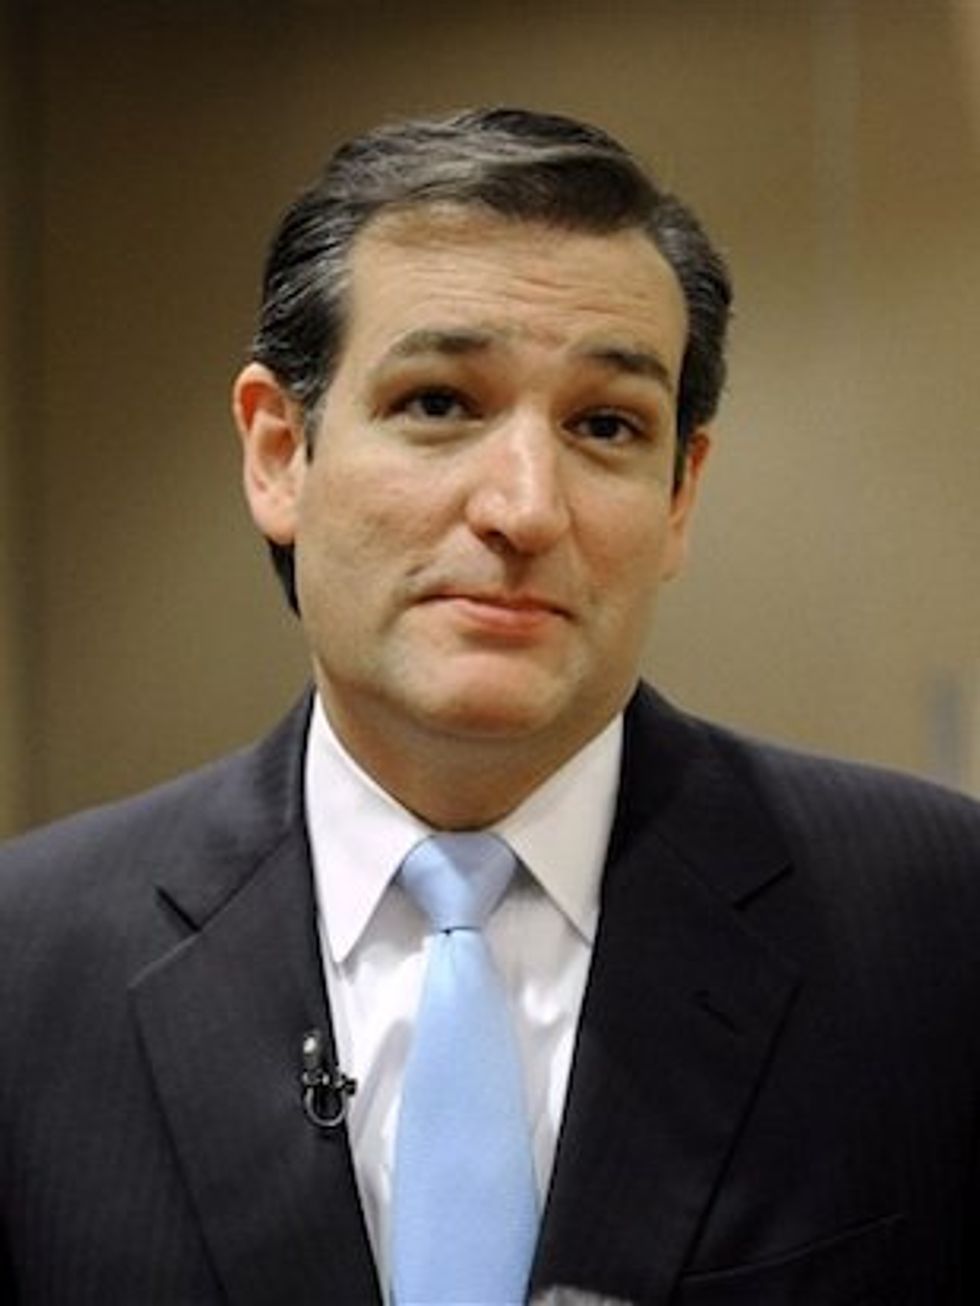 Ted Cruz Would Like To President Us Even Though He Was Born In Socialist Canada (Which is Not America)